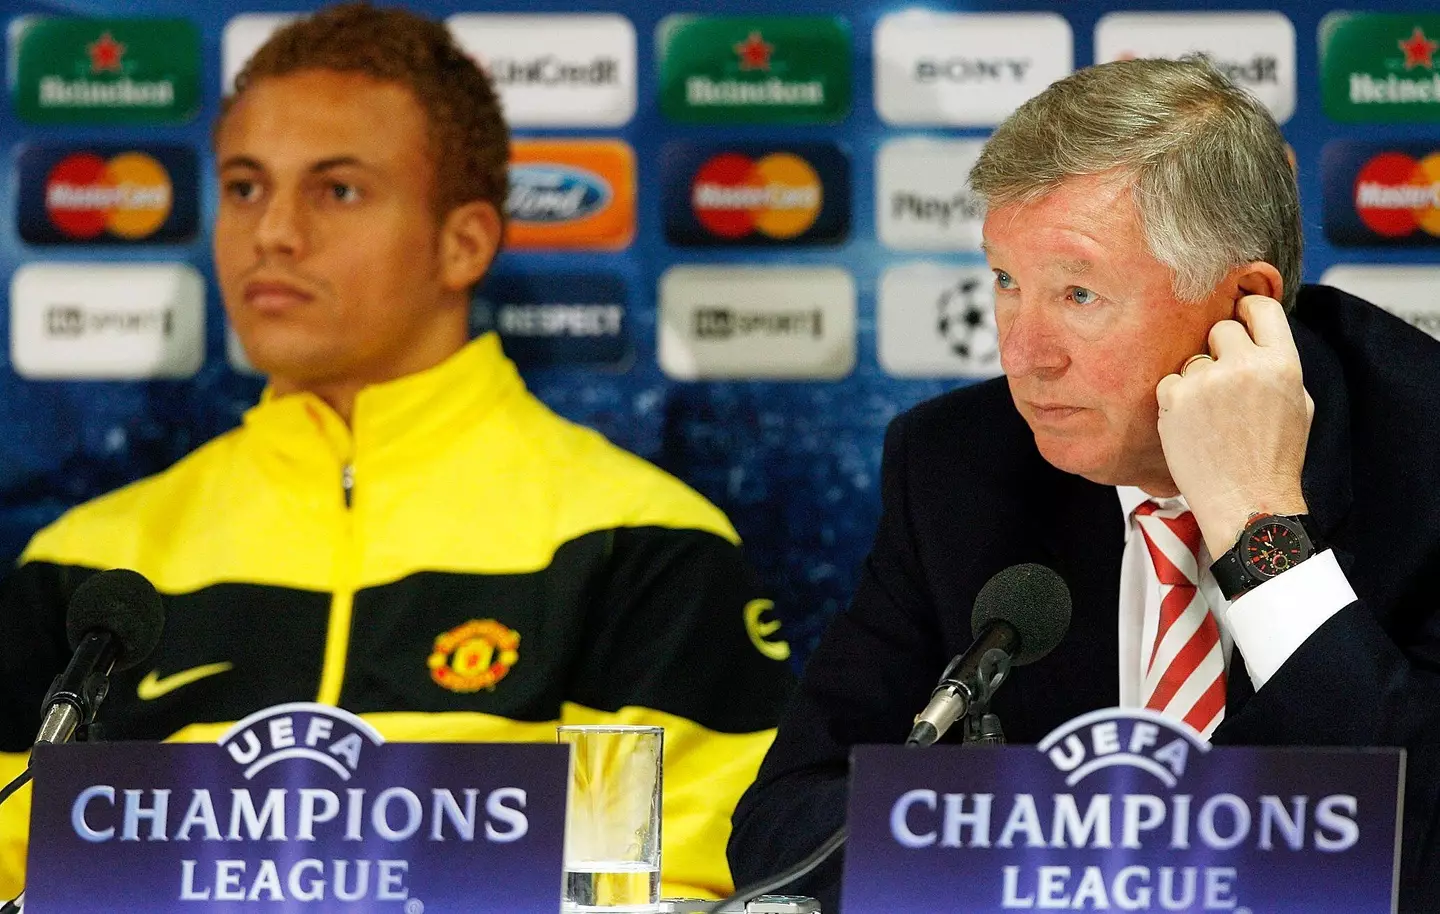 Wes Brown played under Sir Alex Ferguson for 15 years at Manchester United